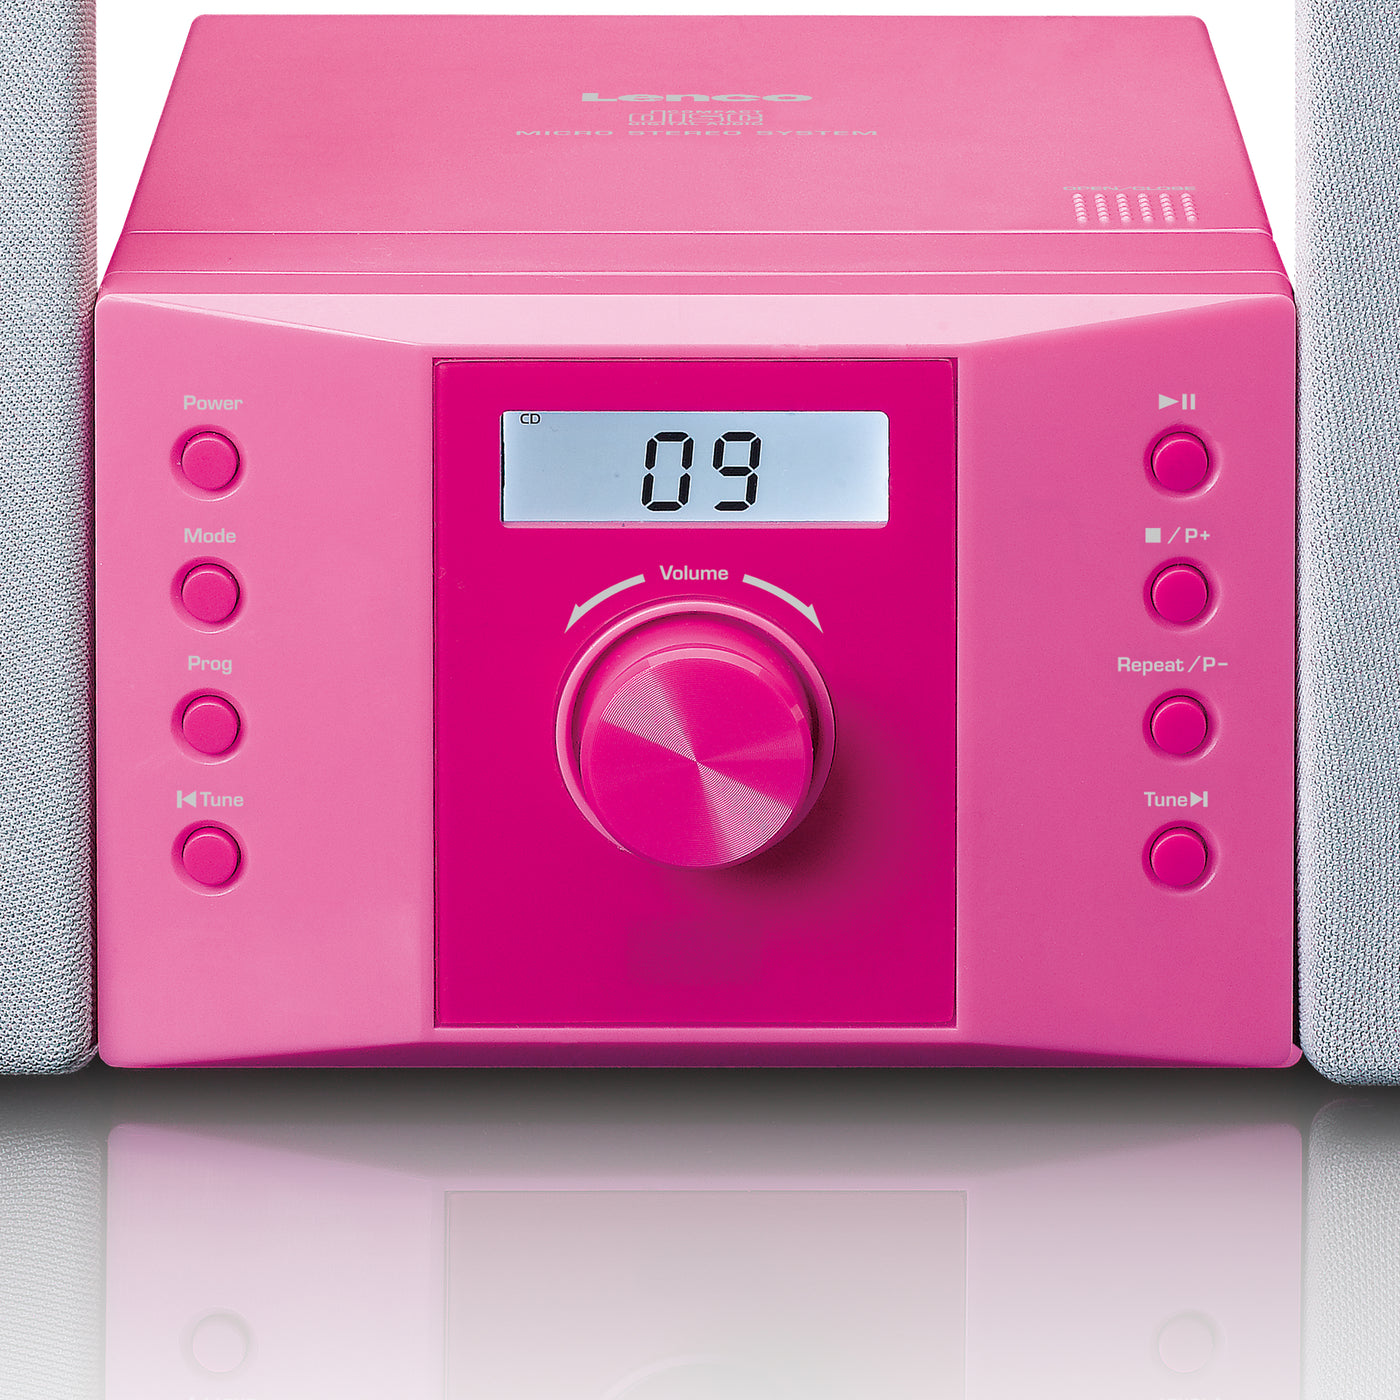 LENCO MC-013PK - Stereo system with FM radio and CD player - Pink